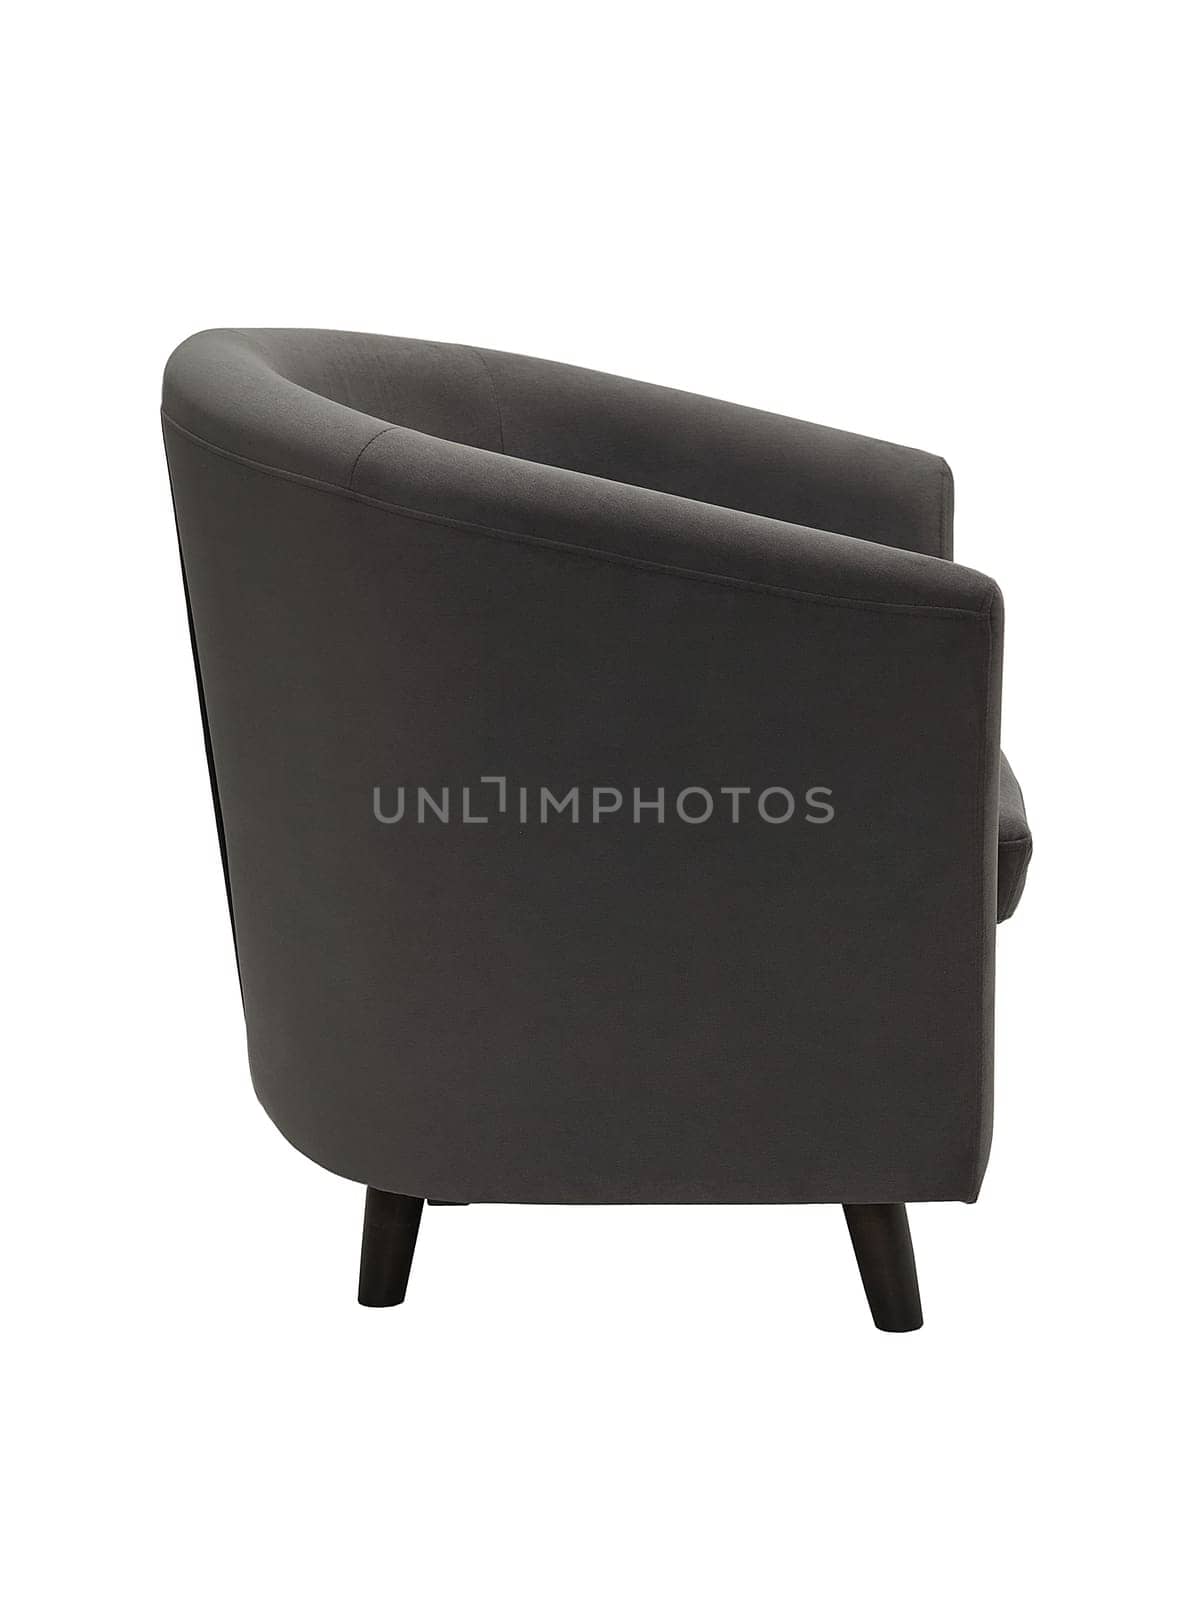 modern gray fabric armchair with wooden legs isolated on white background, side view.